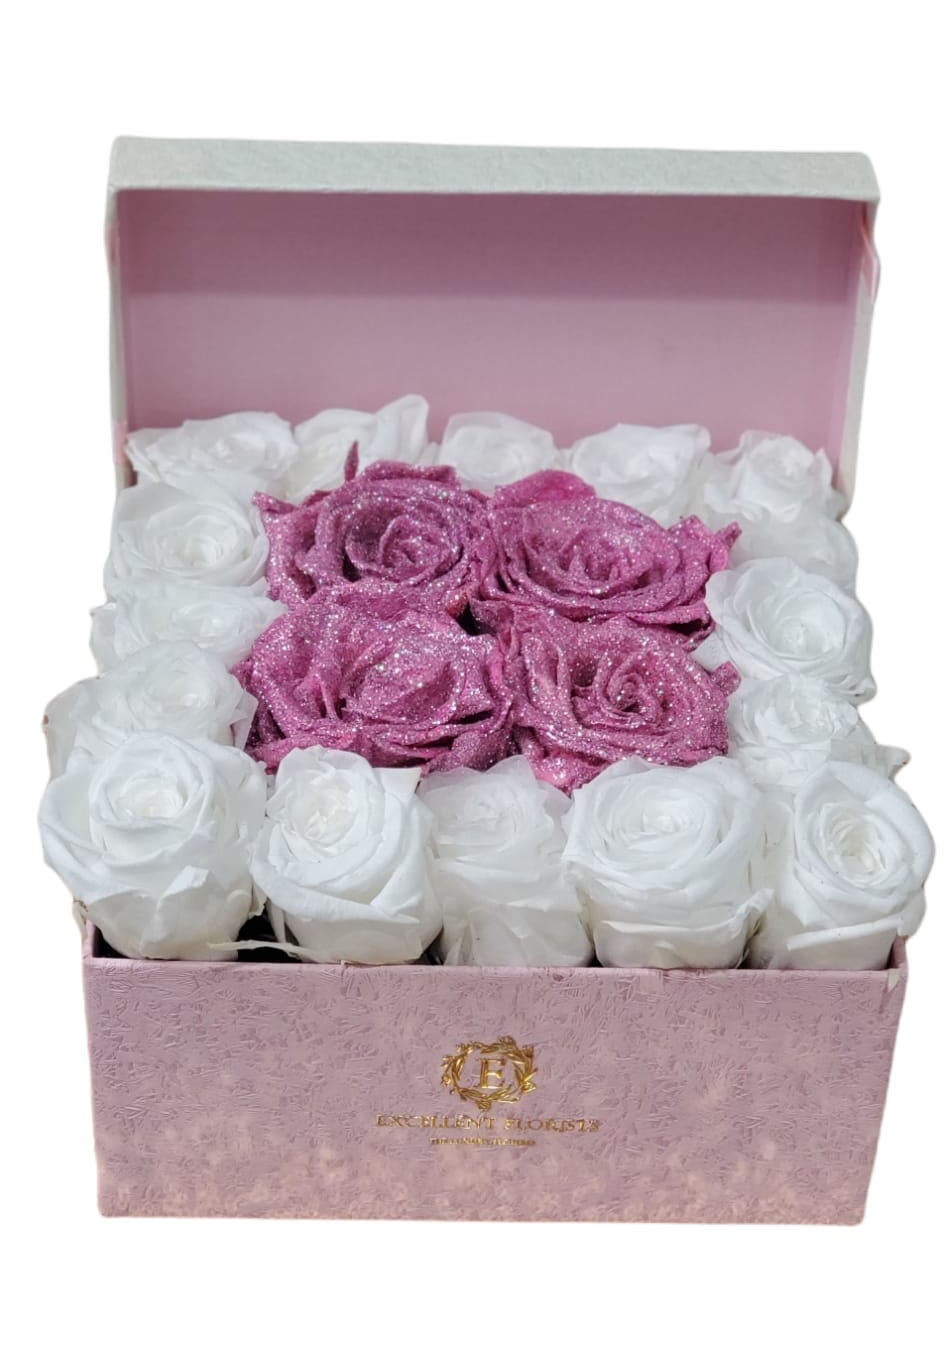 Medium Square Bicolor White and Pink Preserved Roses